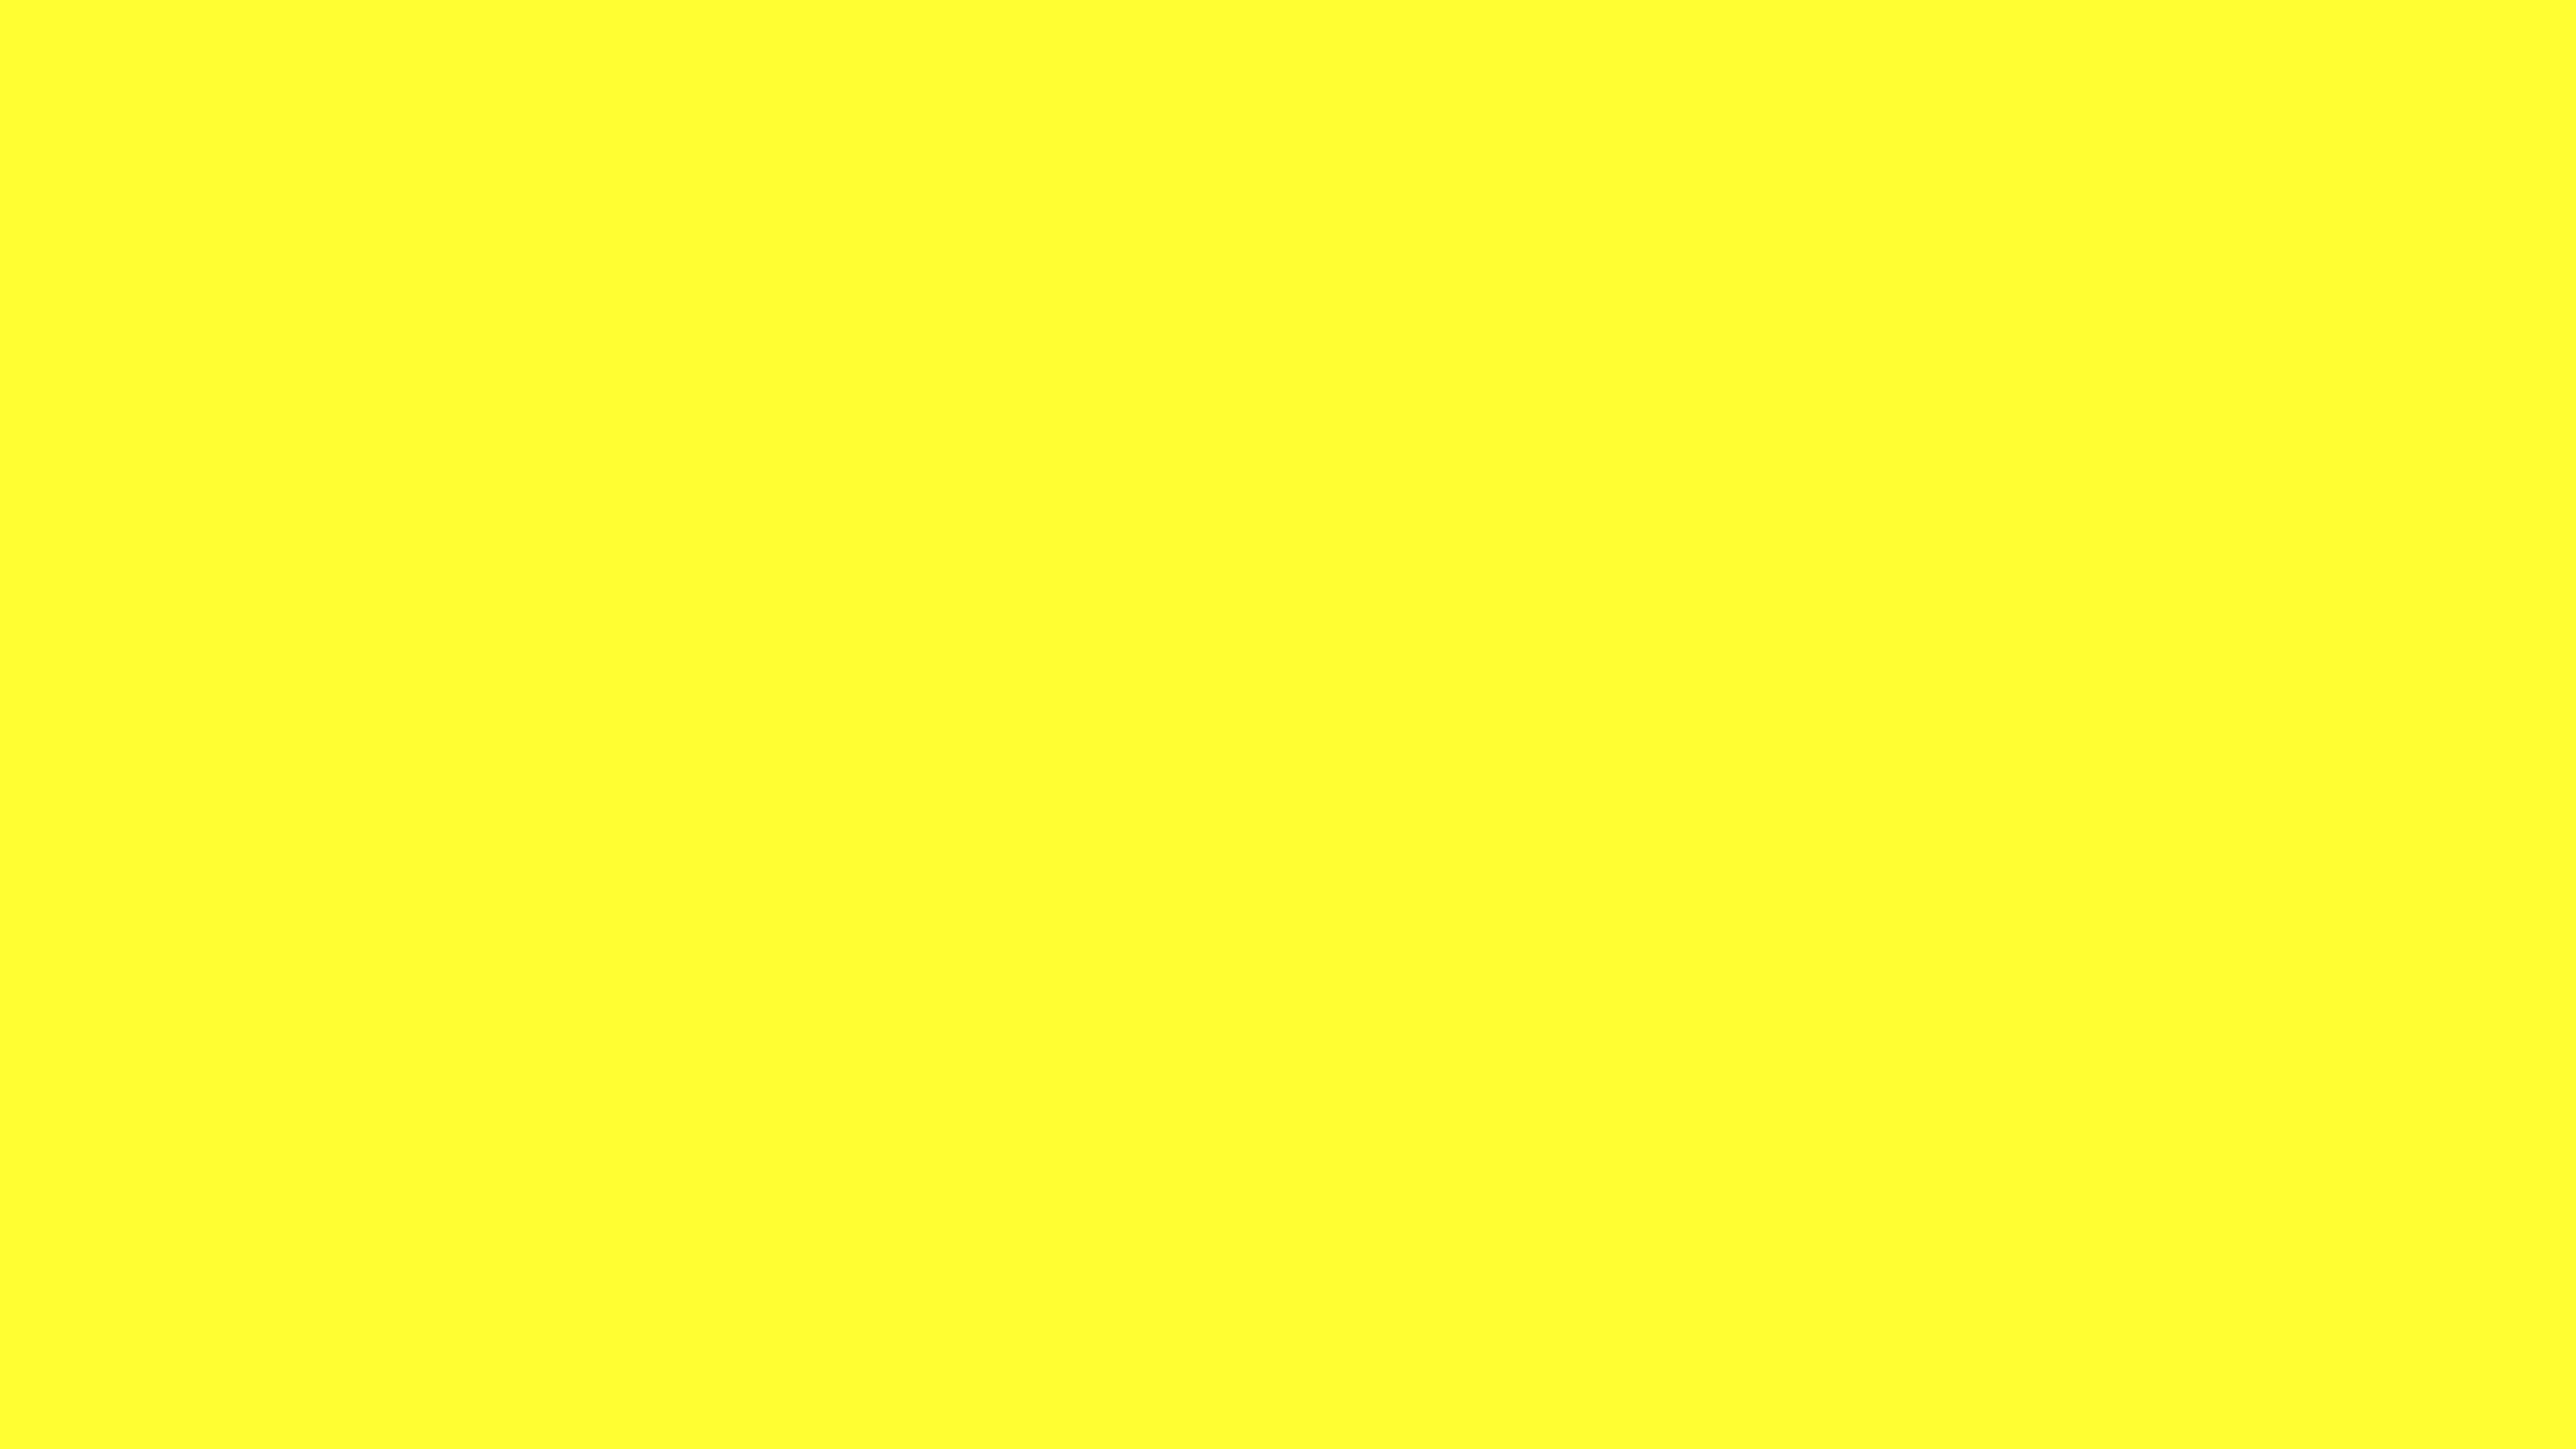 3840x2160 Yellow RYB Solid Color Background